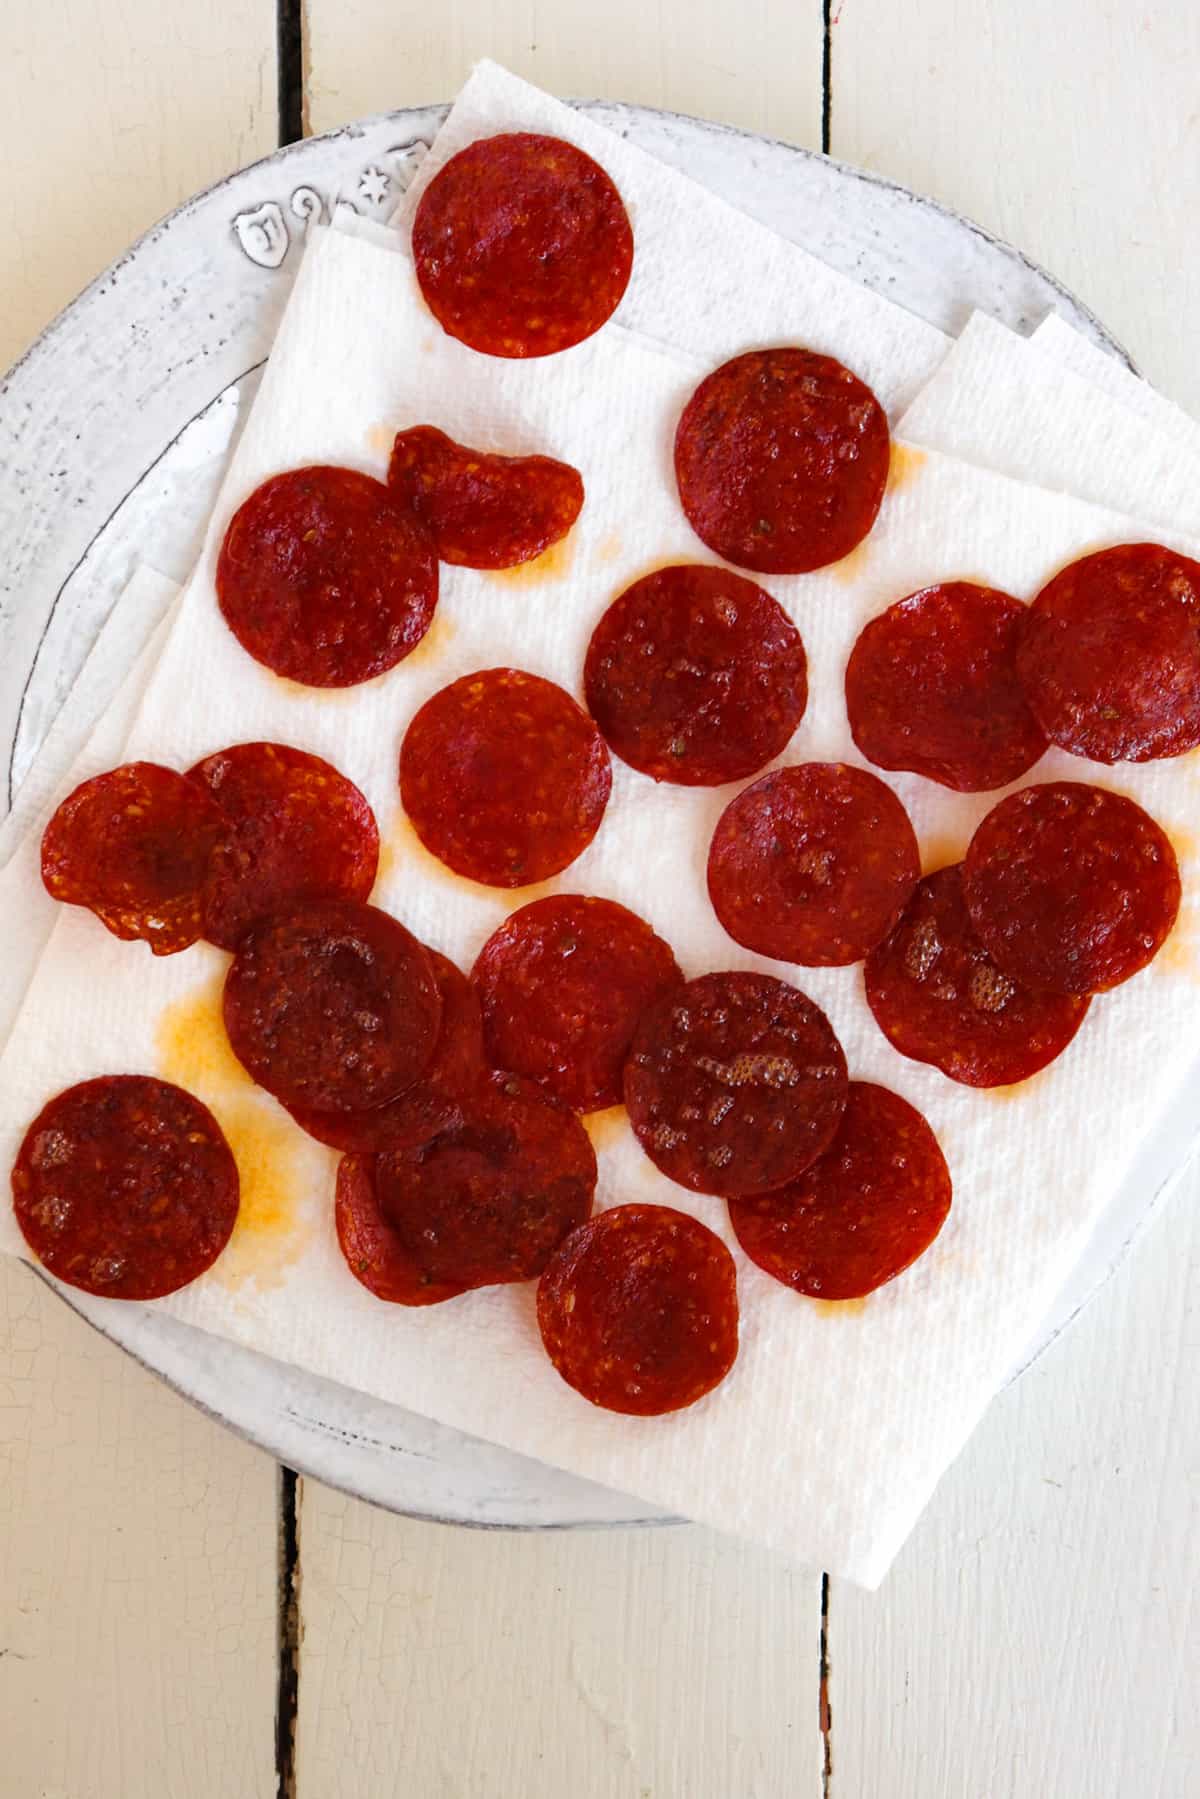 cooked pepperoni on a paper towel.